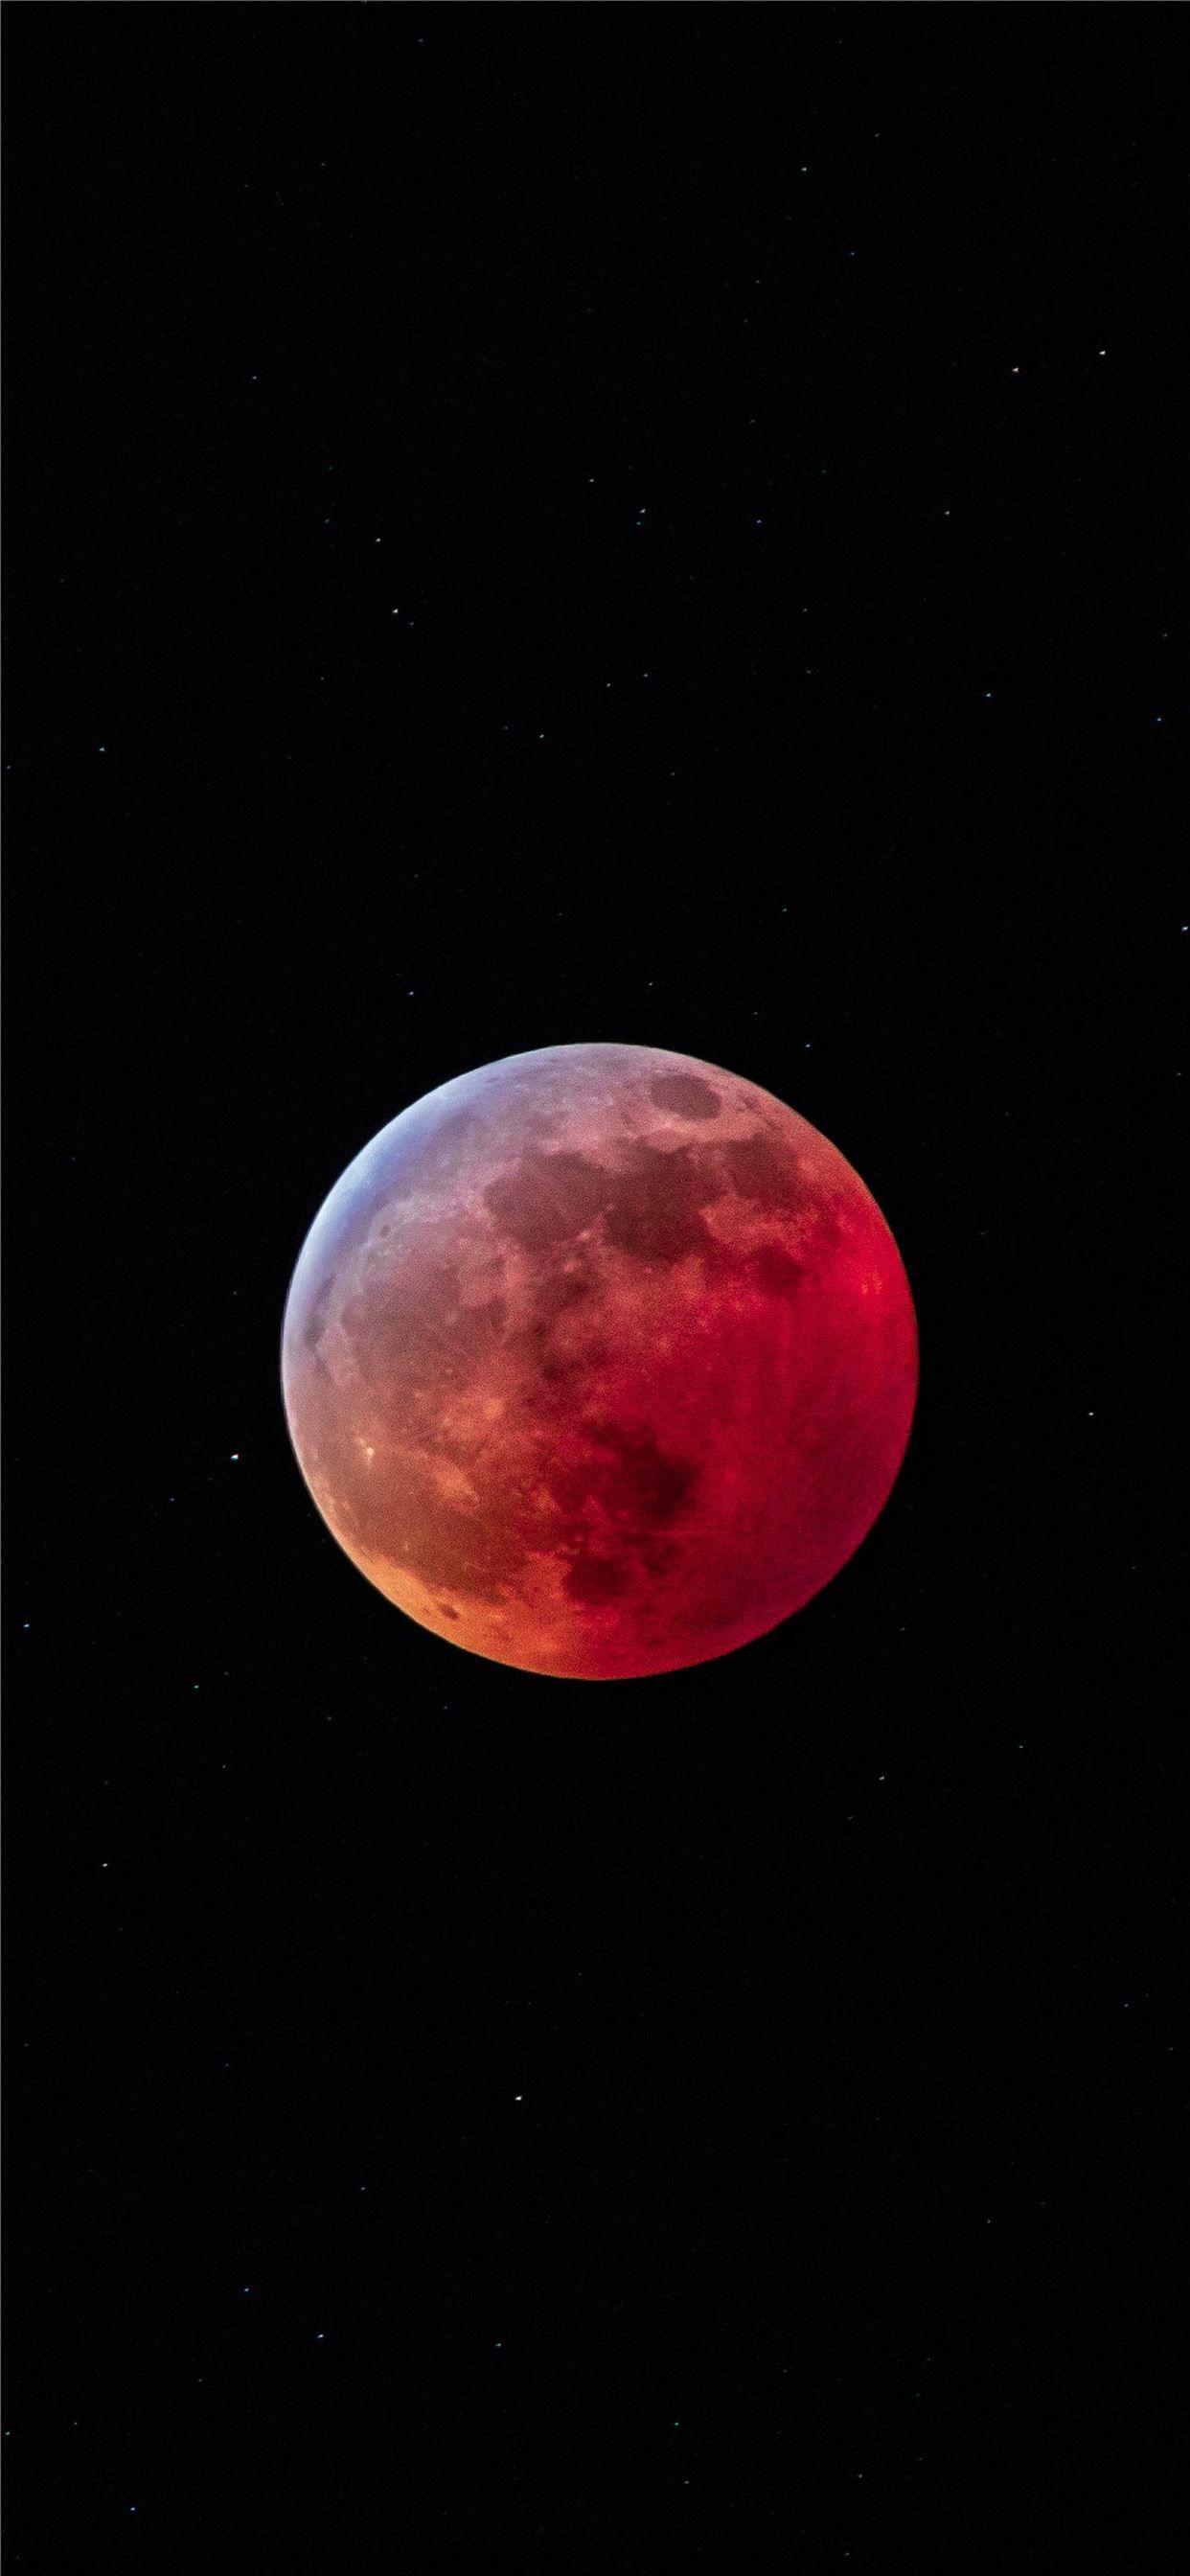 IPhone wallpaper of a red moon in the night sky - Blood